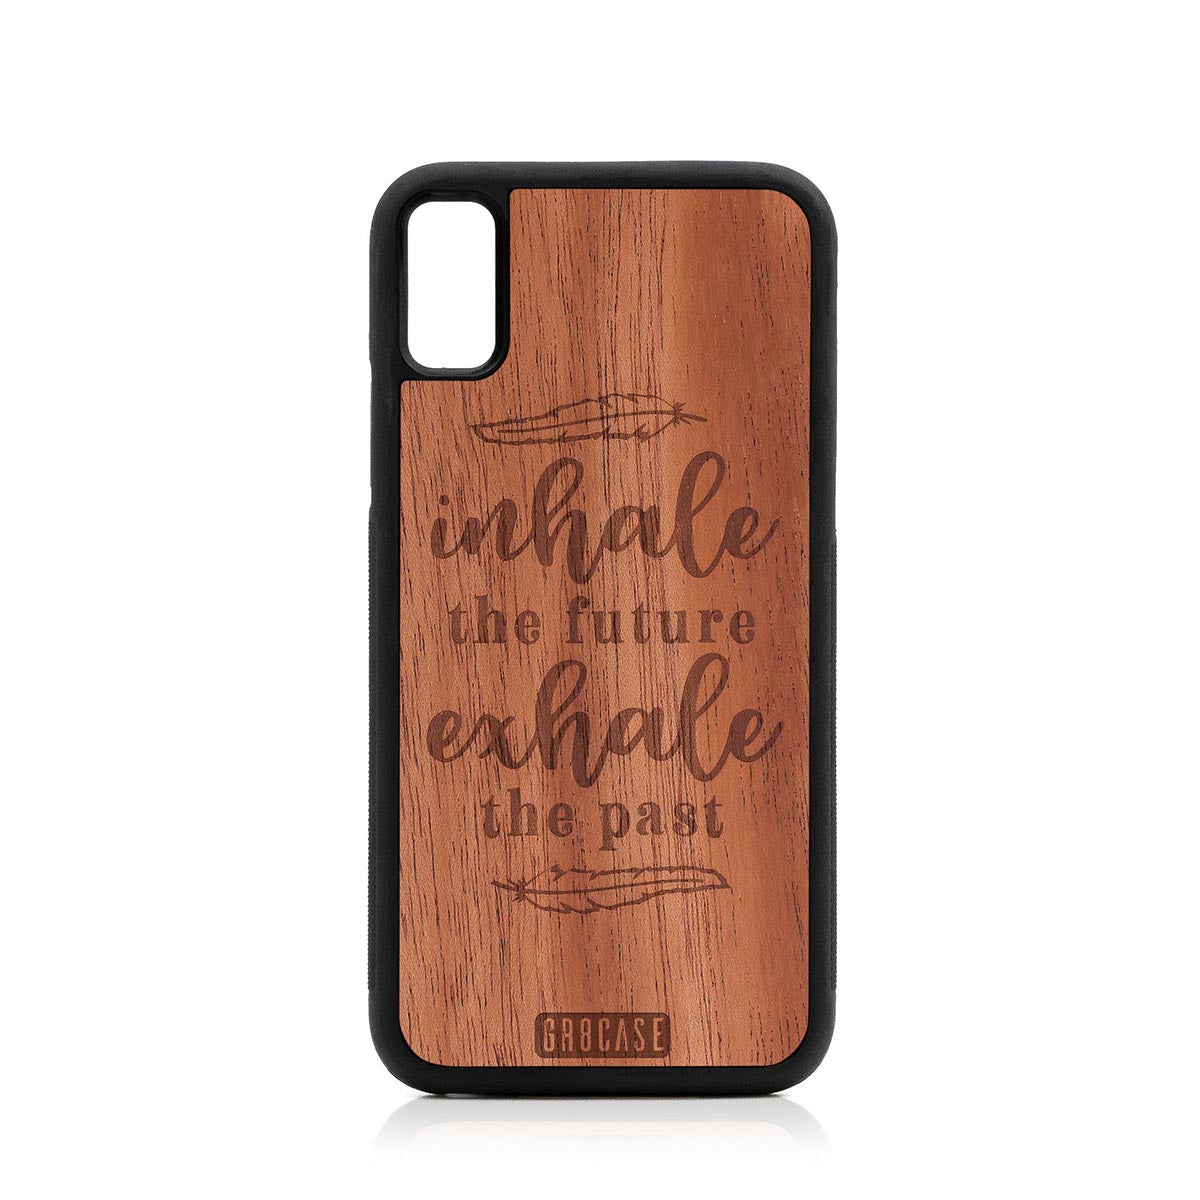 Inhale Future Exhale The Past Design Wood Case For iPhone X/XS by GR8CASE